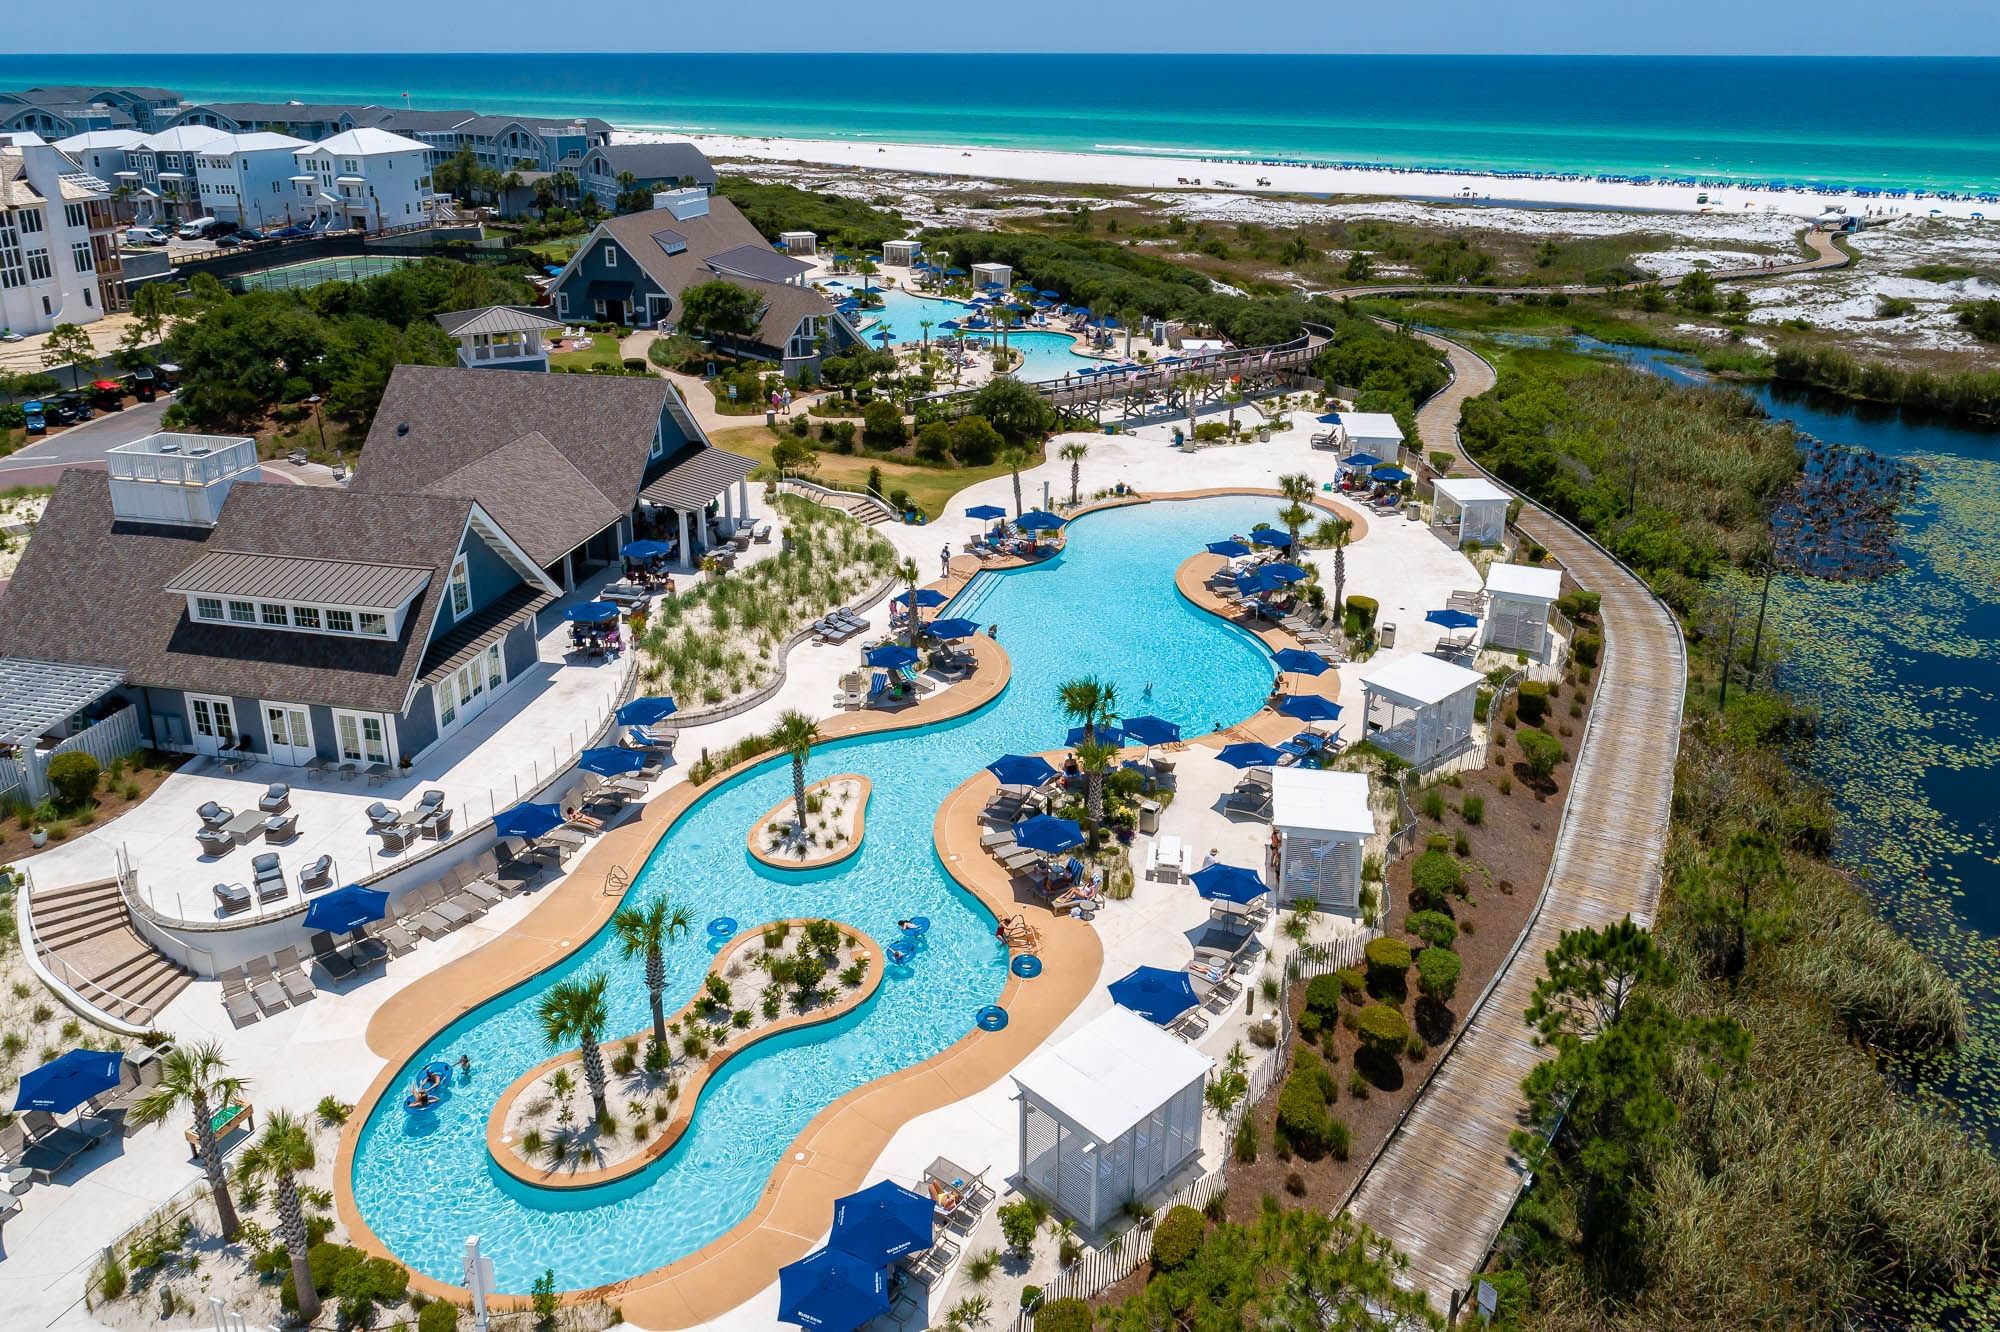 Aerial view of Watersound Beach Club pools, dining, and expansive private beach along the Gulf of Mexico